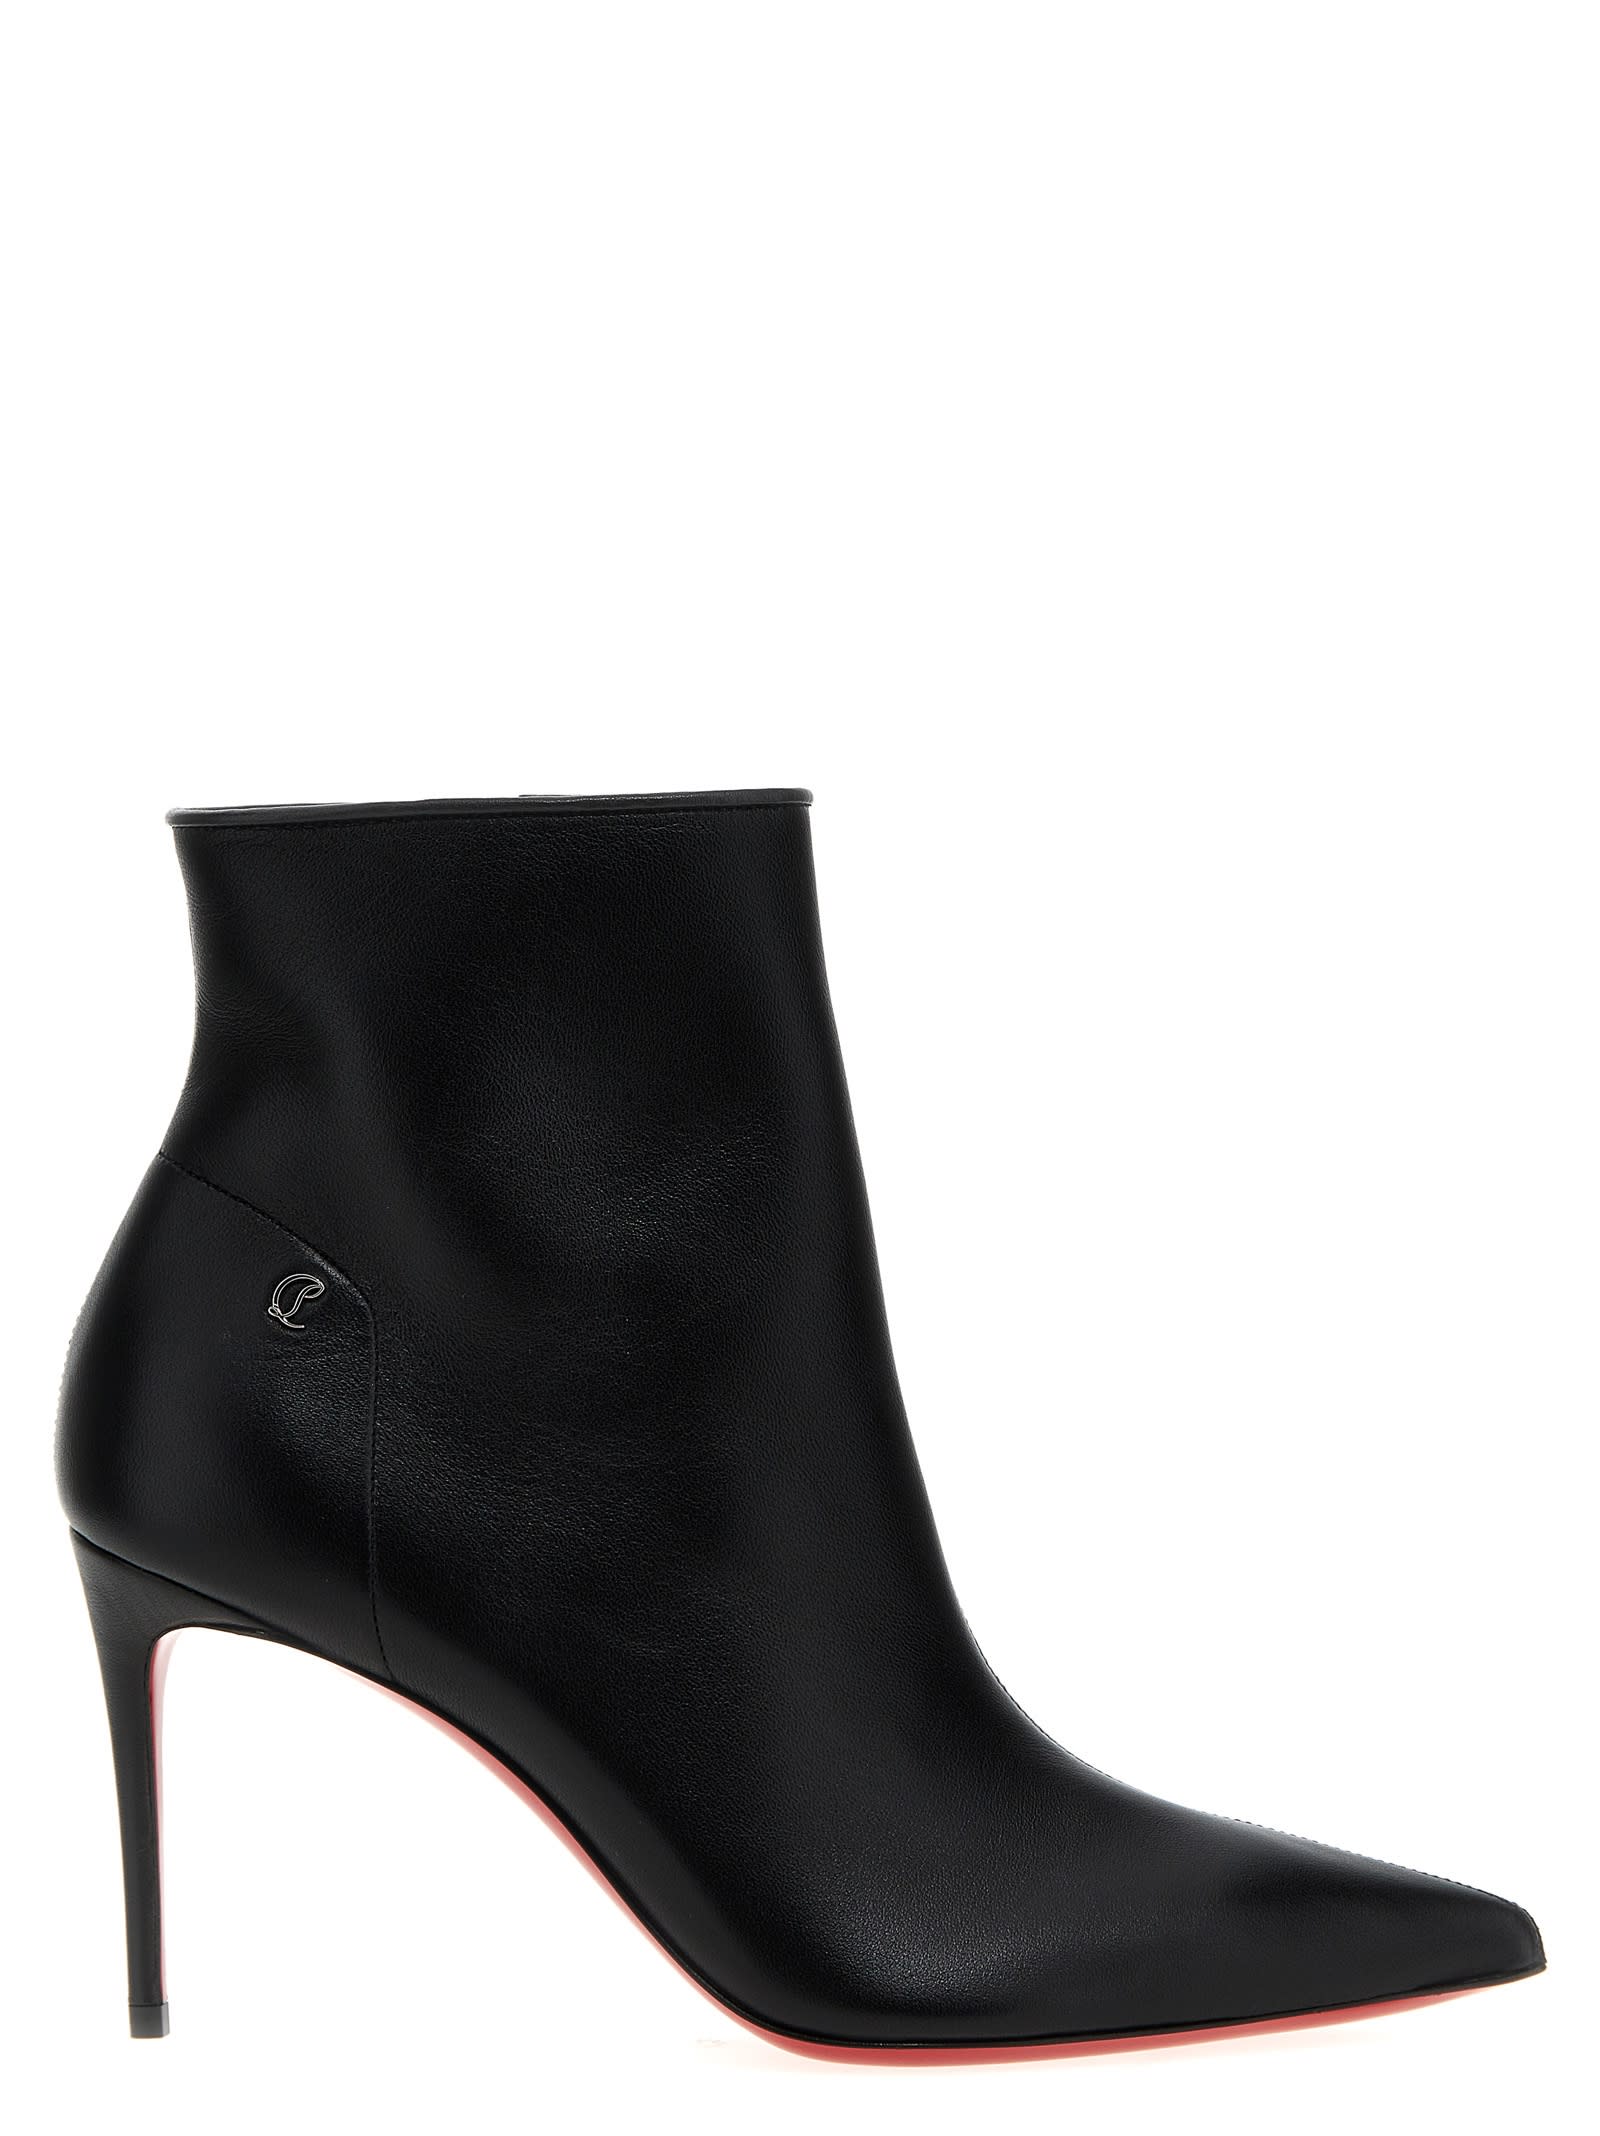 CHRISTIAN LOUBOUTIN SPORTY KATE ANKLE BOOTS